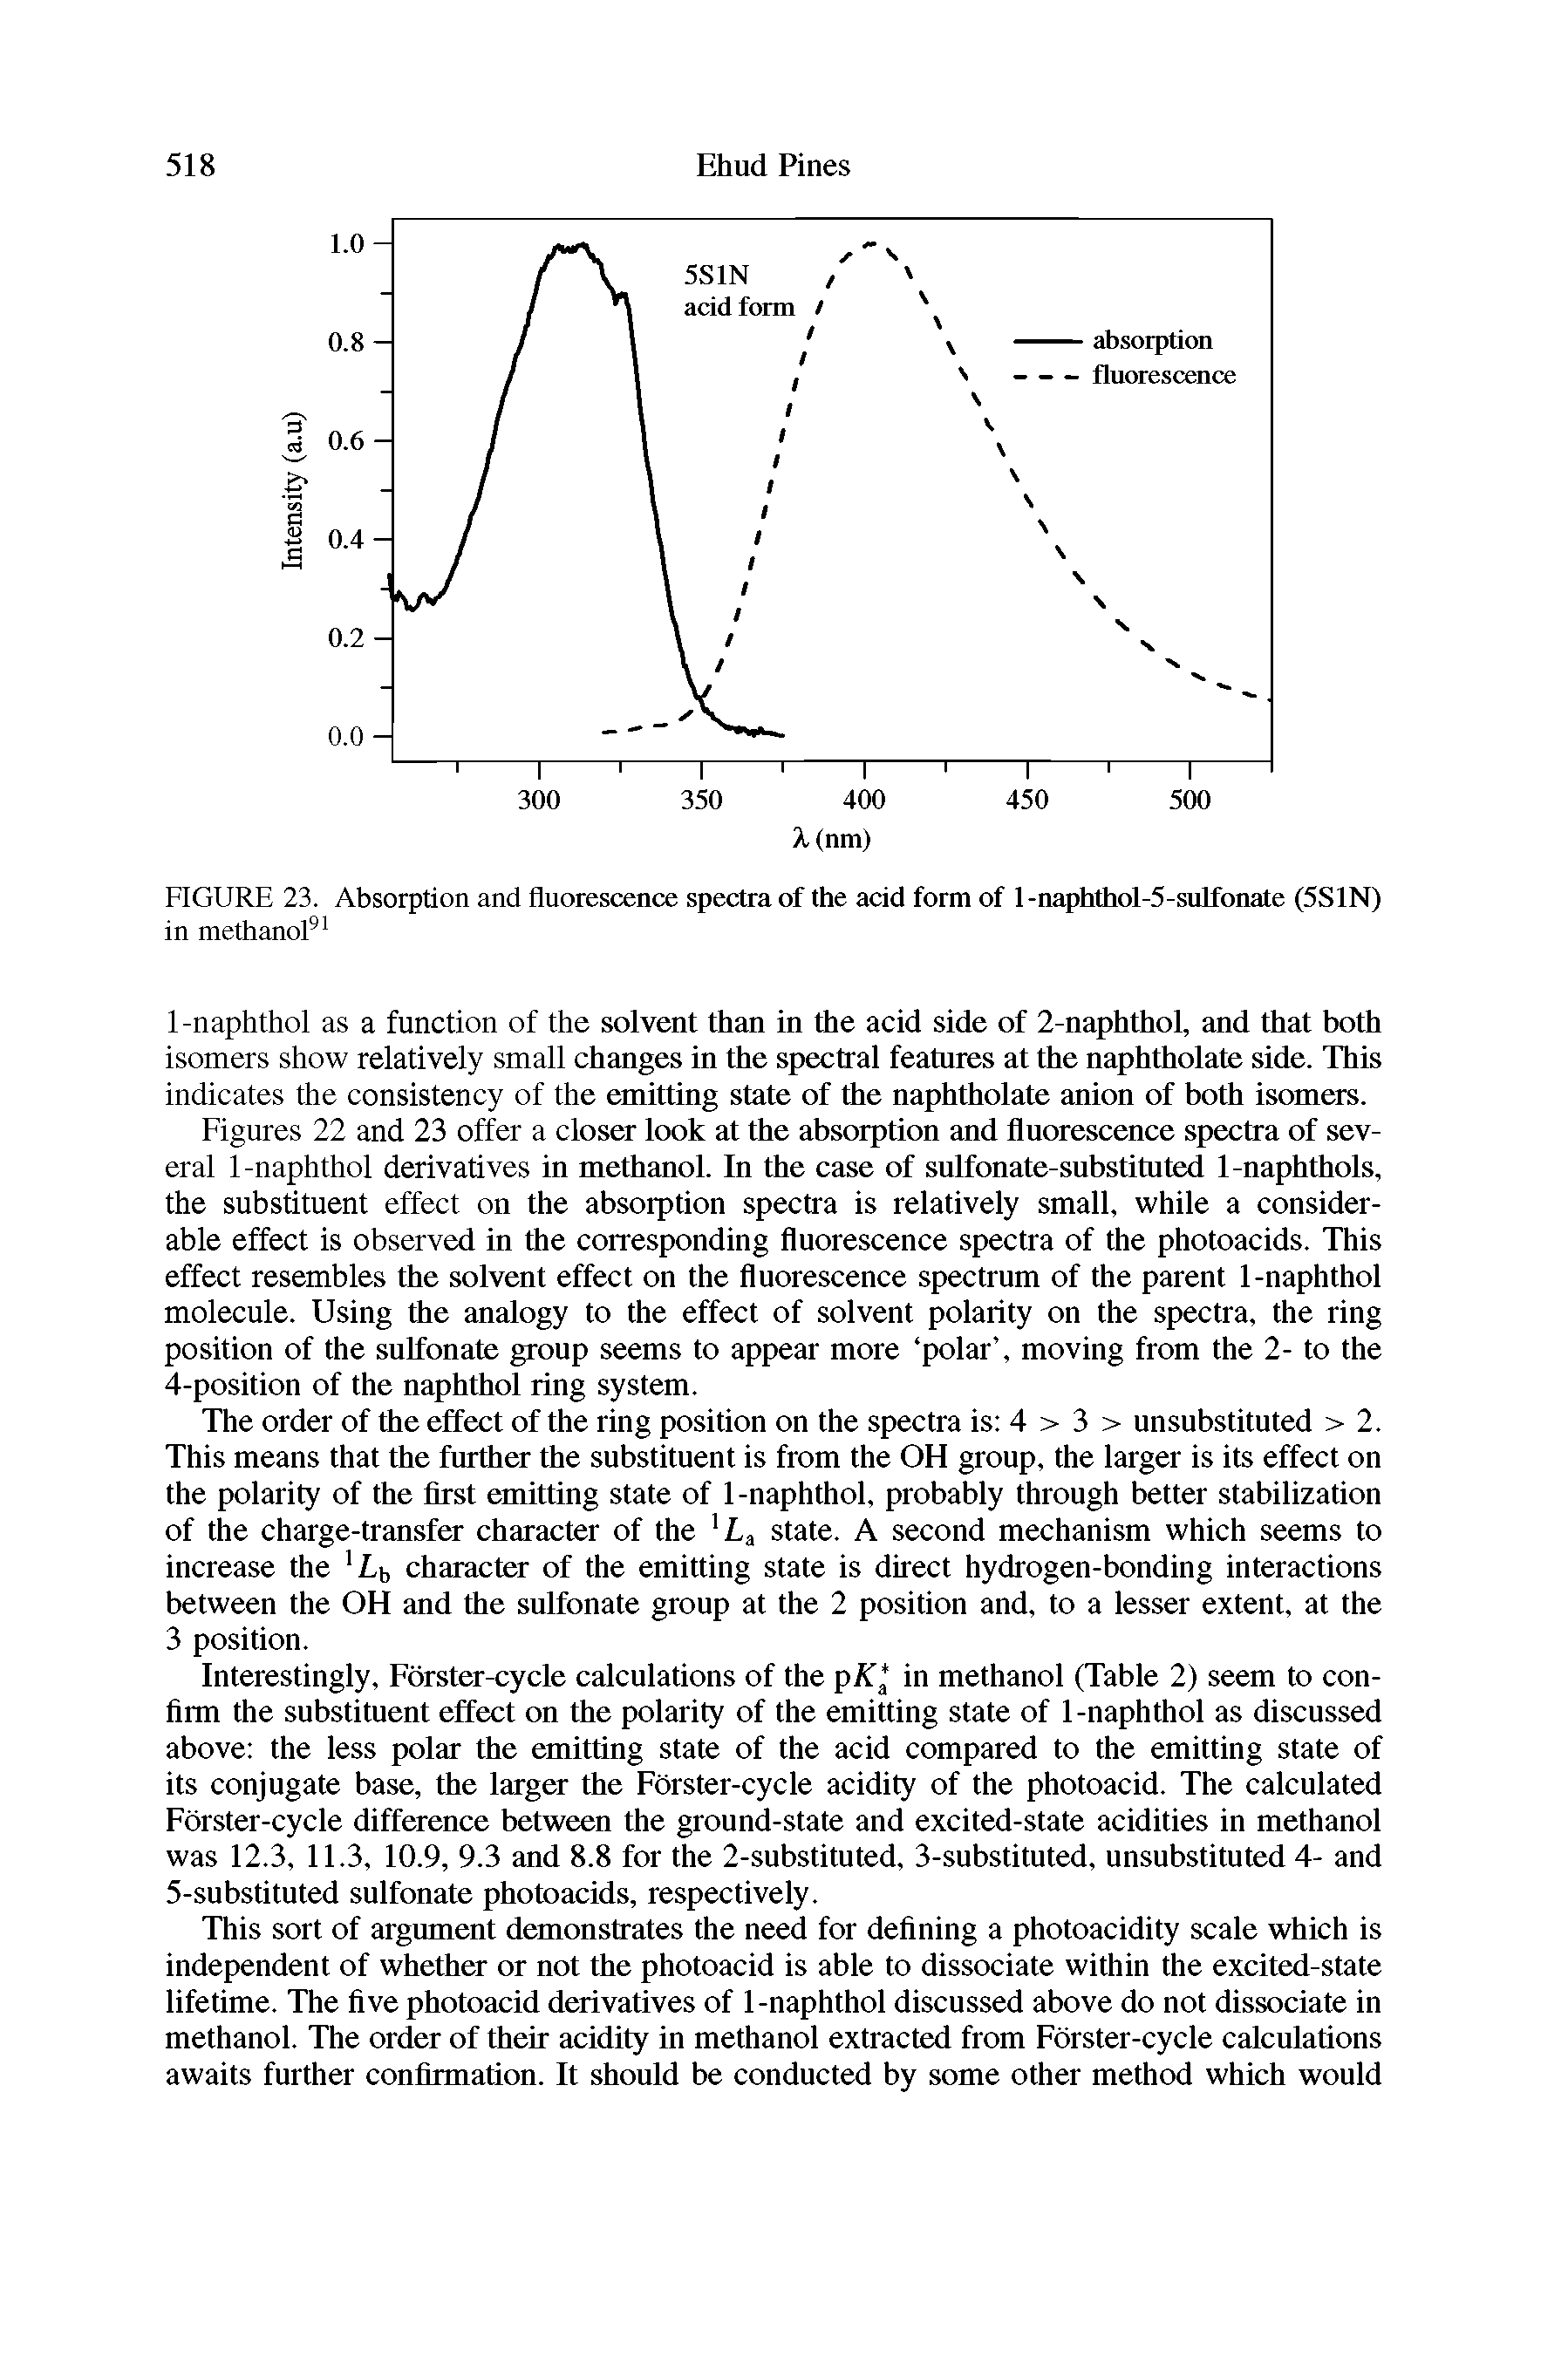 Figures 22 and 23 offer a closer look at the absorption and fluorescence spectra of several 1-naphthol derivatives in methanol. In the case of sulfonate-substituted 1-naphthols, the substituent effect on the absorption spectra is relatively small, while a considerable effect is observed in the corresponding fluorescence spectra of the photoacids. This effect resembles the solvent effect on the fluorescence spectrum of the parent 1-naphthol molecule. Using the analogy to the effect of solvent polarity on the spectra, the ring position of the sulfonate group seems to appear more polar , moving from the 2- to the...